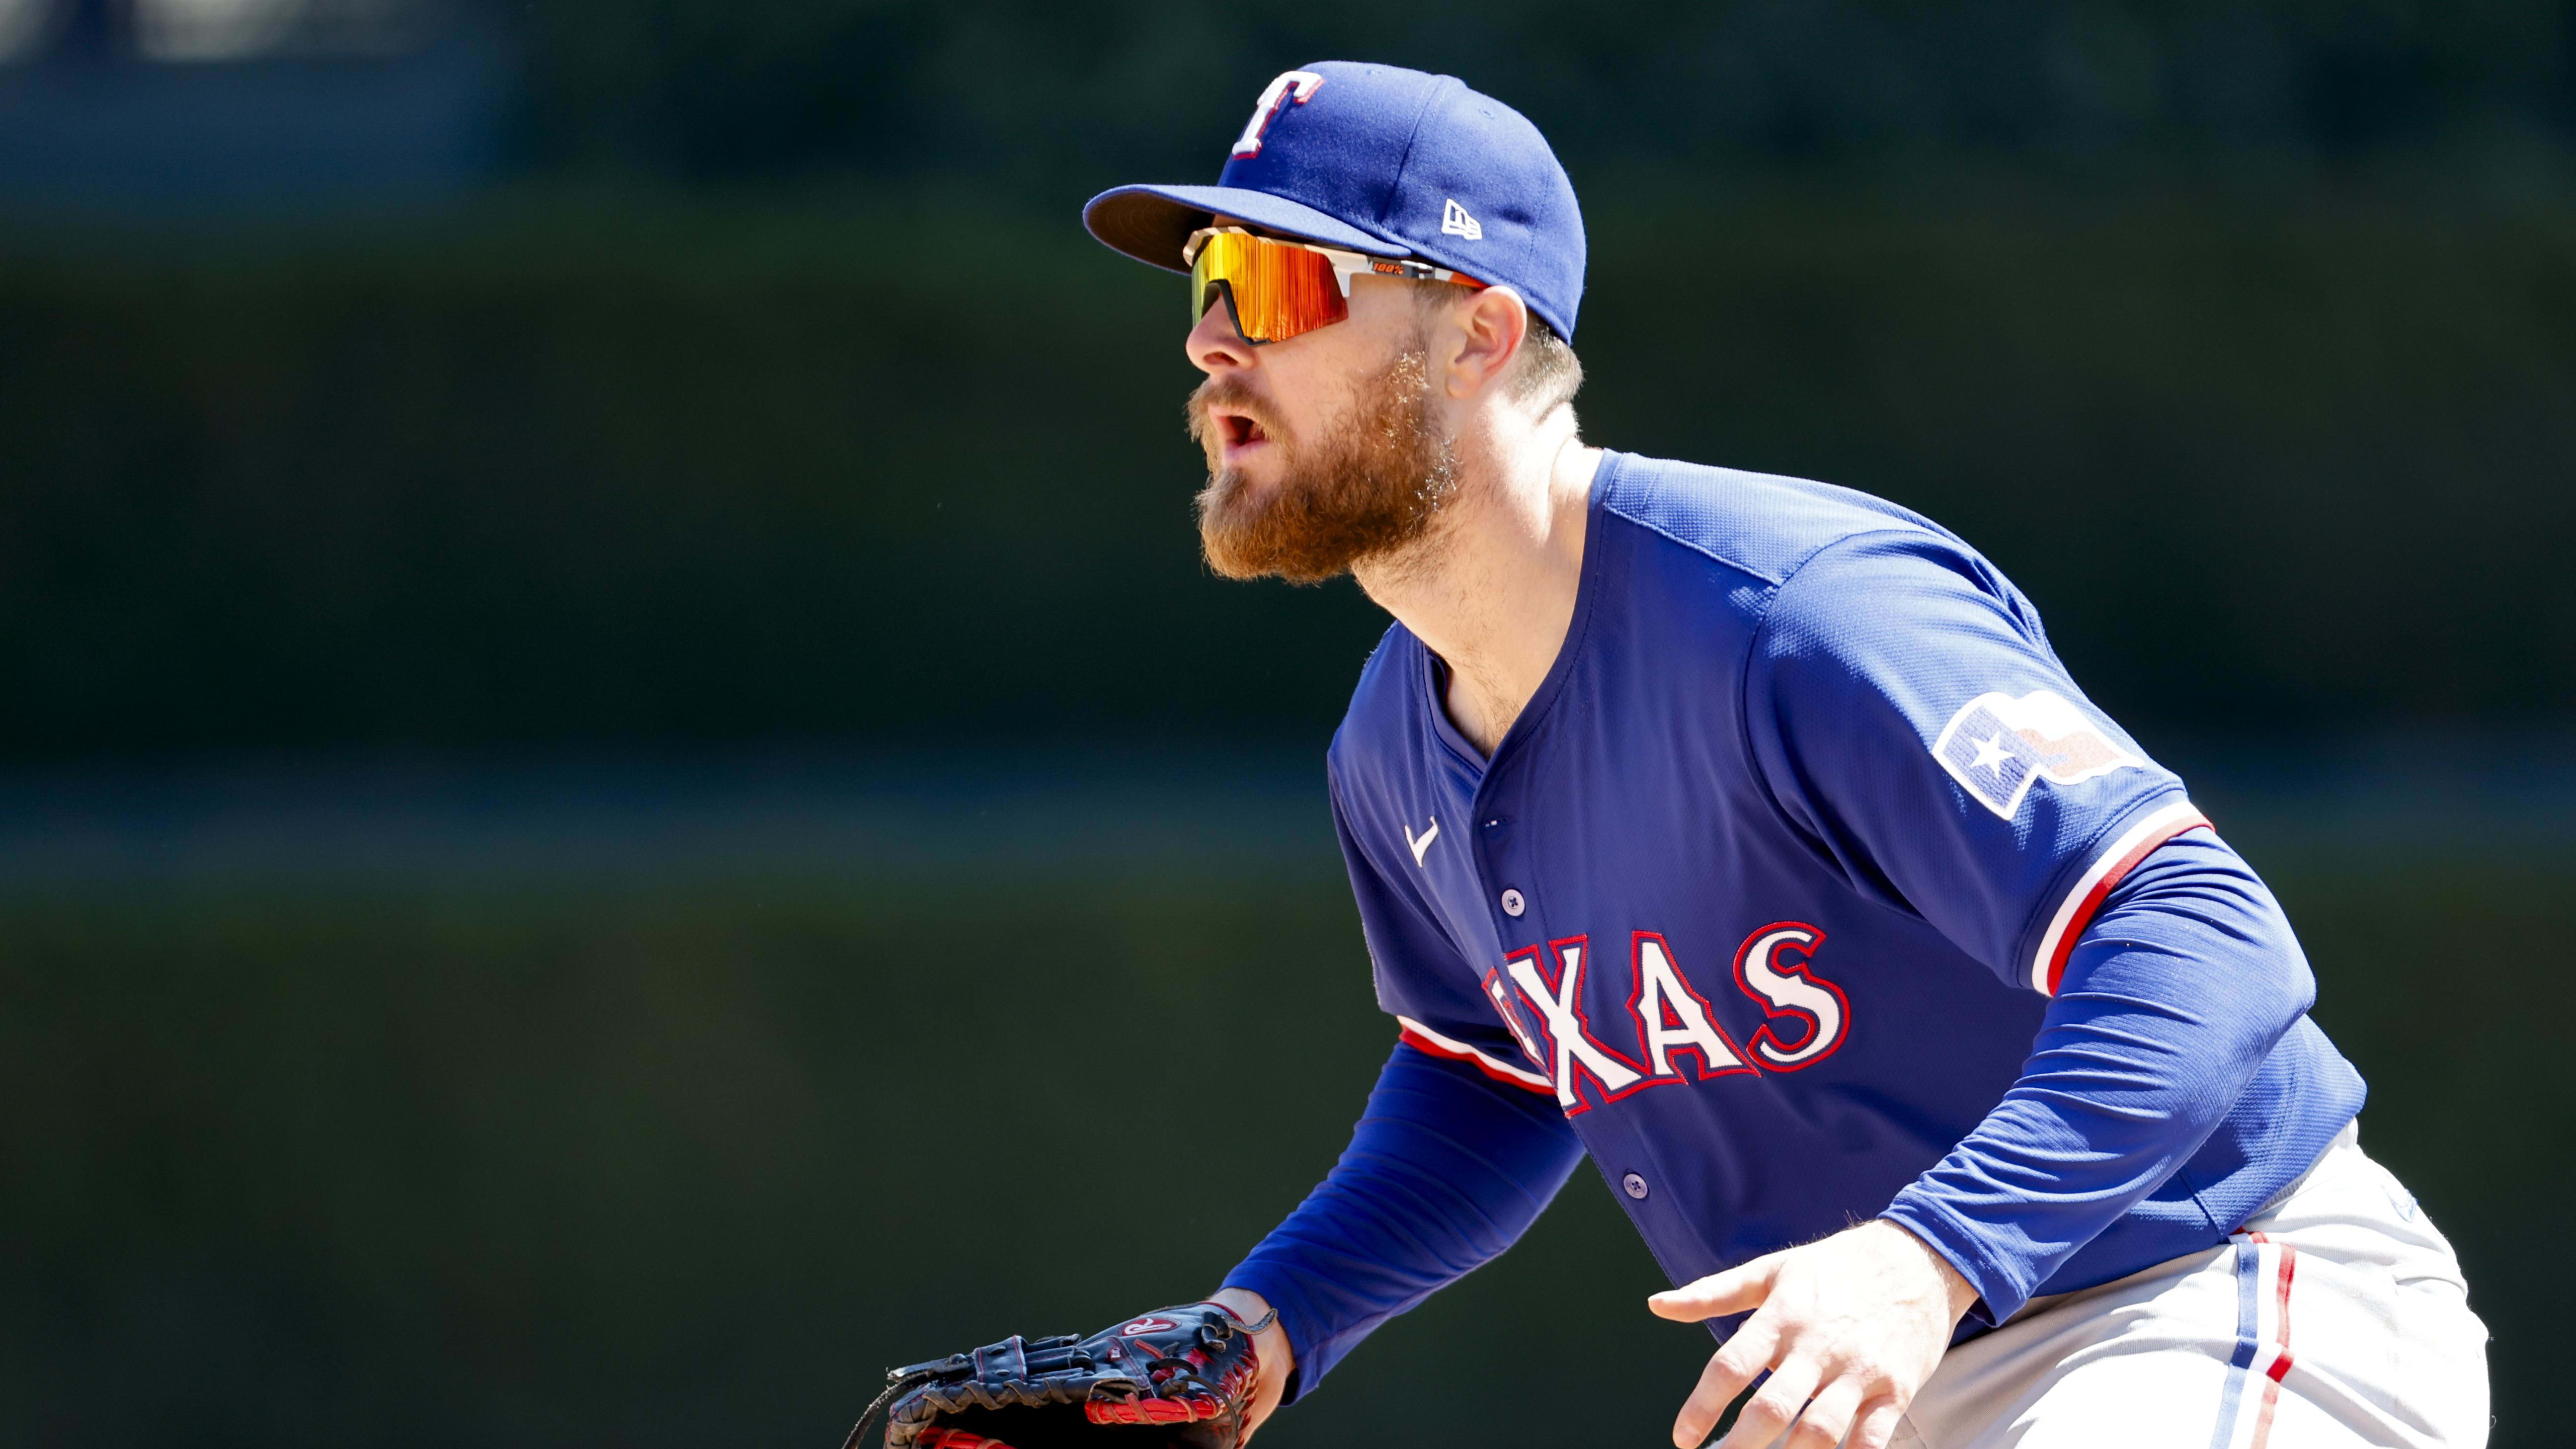 Southside Bound: Former Texas Rangers First Baseman Jared Walsh Signs Minor League Deal With Chicago White Sox